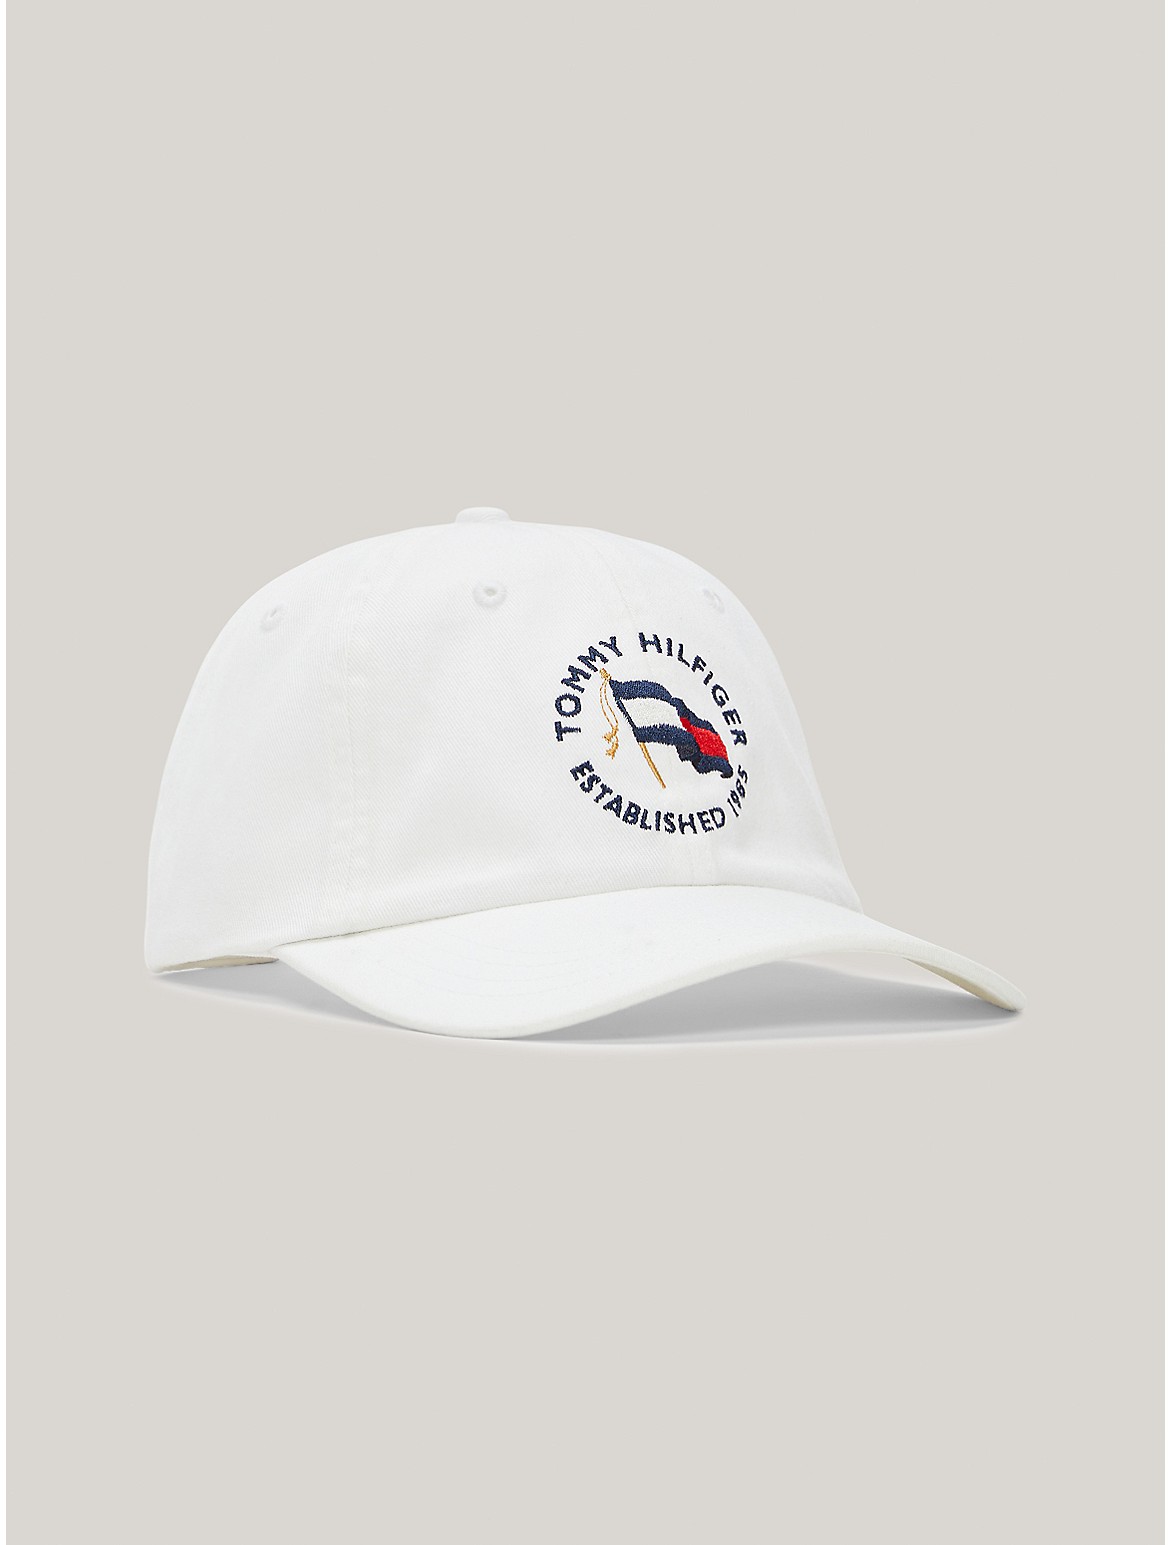 Tommy Hilfiger Flag Graphic Baseball Cap In White